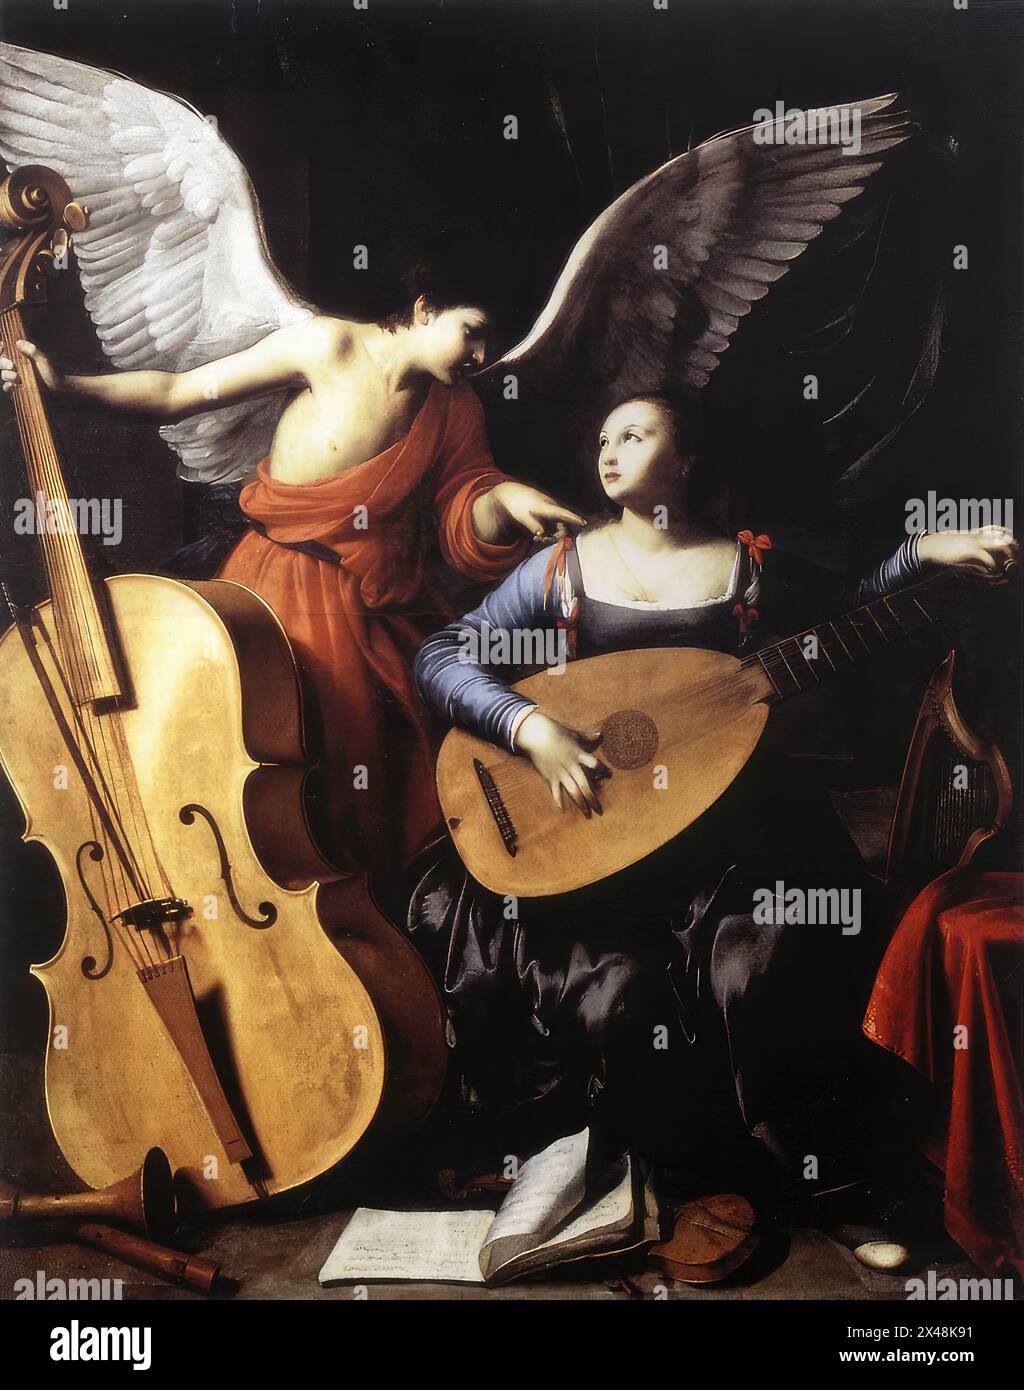 SARACENI, Carlo (b. 1579, Venezia, d. 1620, Venezia)    Saint Cecilia and the Angel  c. 1610  Oil on canvas, 172 x 139 cm  Galleria Nazionale d'Arte Antica, Rome    There is a long history of attributions of this painting to various artists. The attribution to Saraceni is accepted by the majority of art historians. However, the attribution to a non-Italian, Guy François, has been sustained by all the French critics, notwithstanding the absence of any confirmed Roman works by this artist.    If the painting is compared with certified works of Saraceni and with those of Guy François (all execute Stock Photo